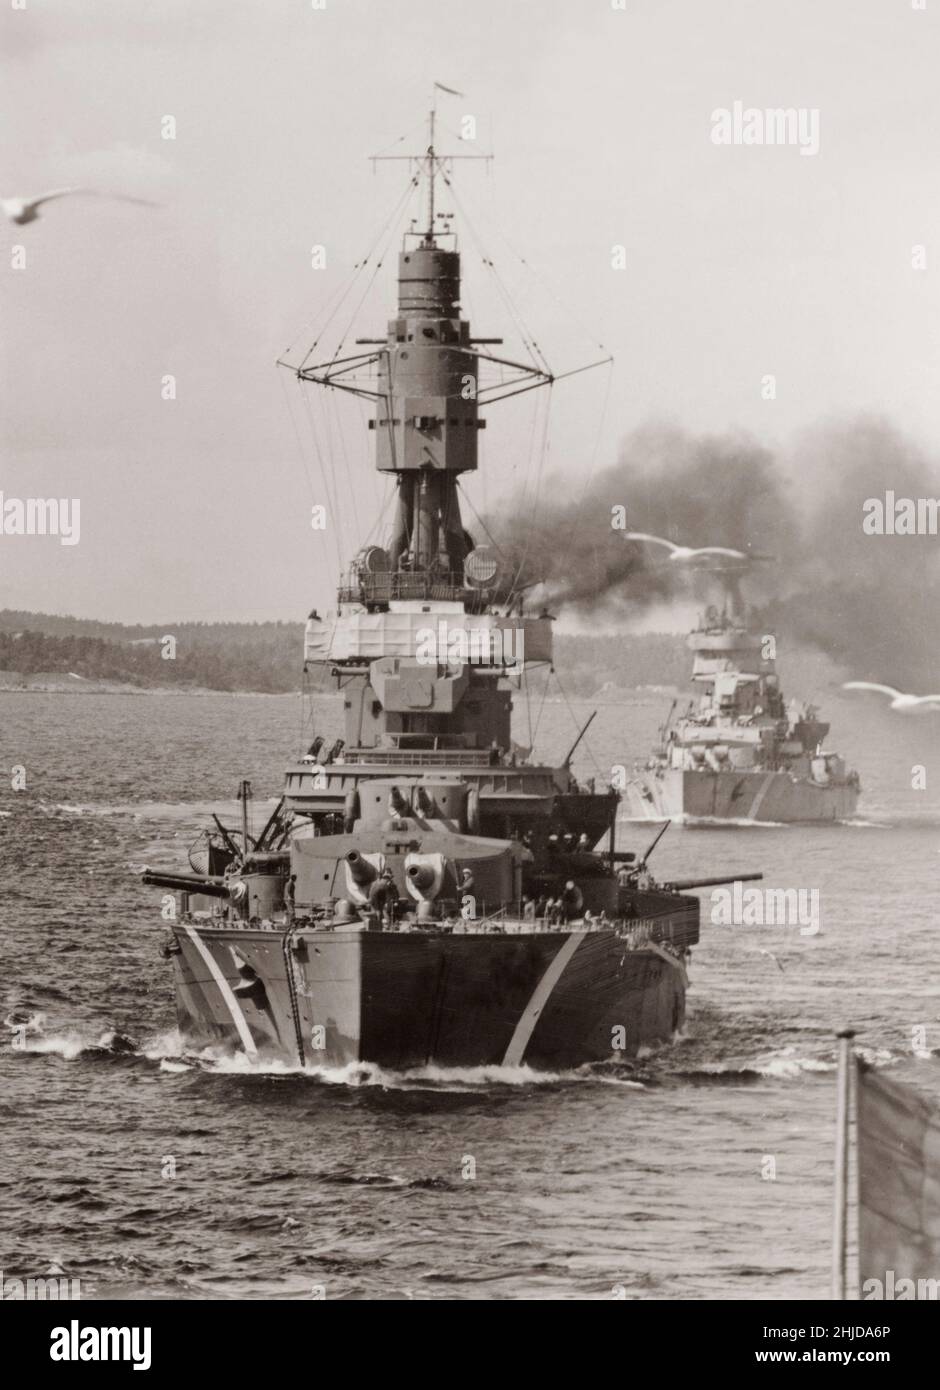 World war II. Warships from the Swedish navy during exercises at sea. Sweden 1940s Stock Photo